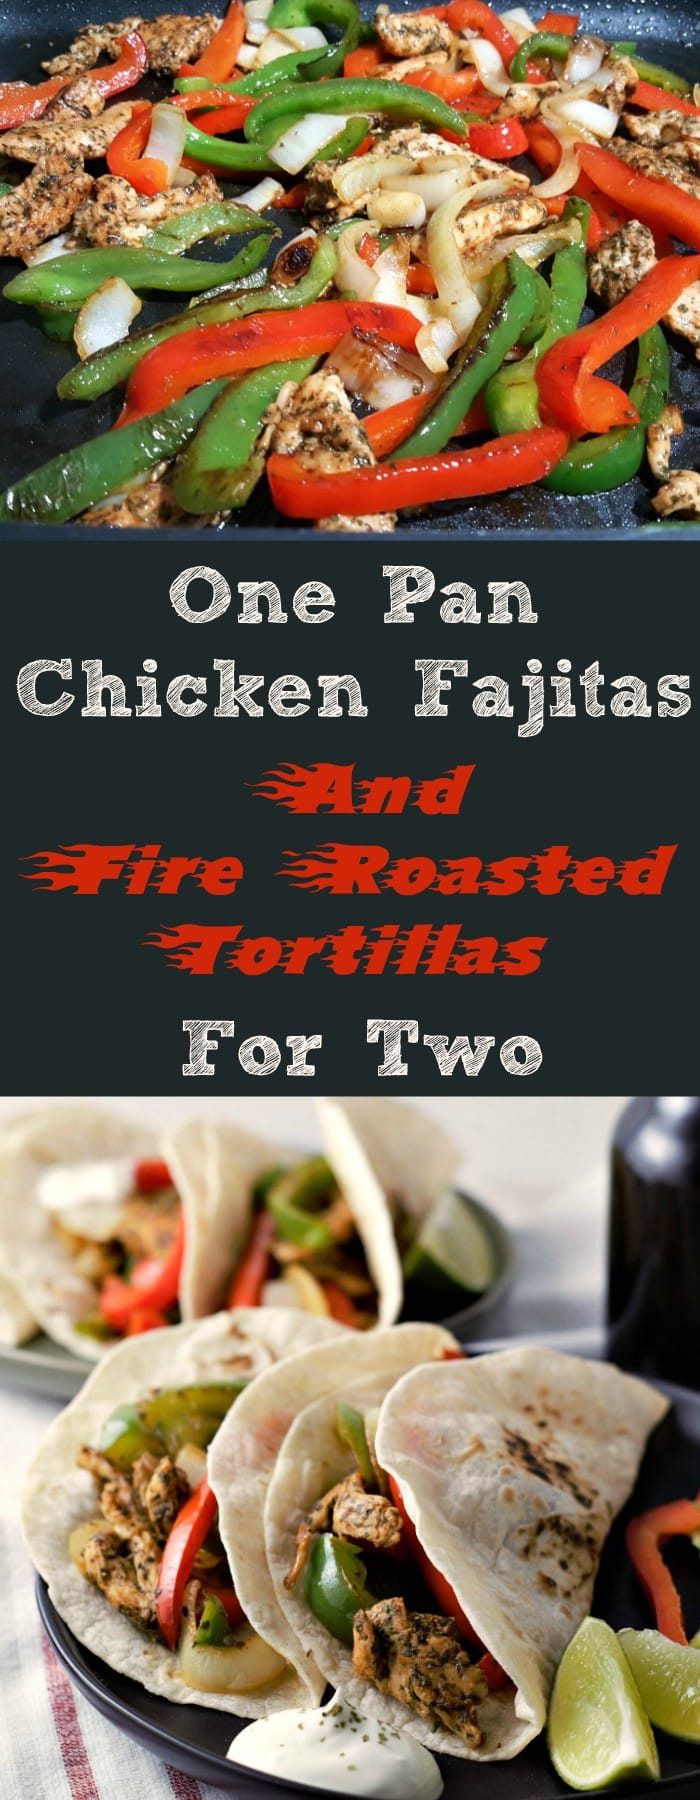 a graphic, top is chicken and veggies frying in a pan, bottom is fajitas on two plates, middle is text saying one pan chicken fajitas and fire roasted tortillas for two.